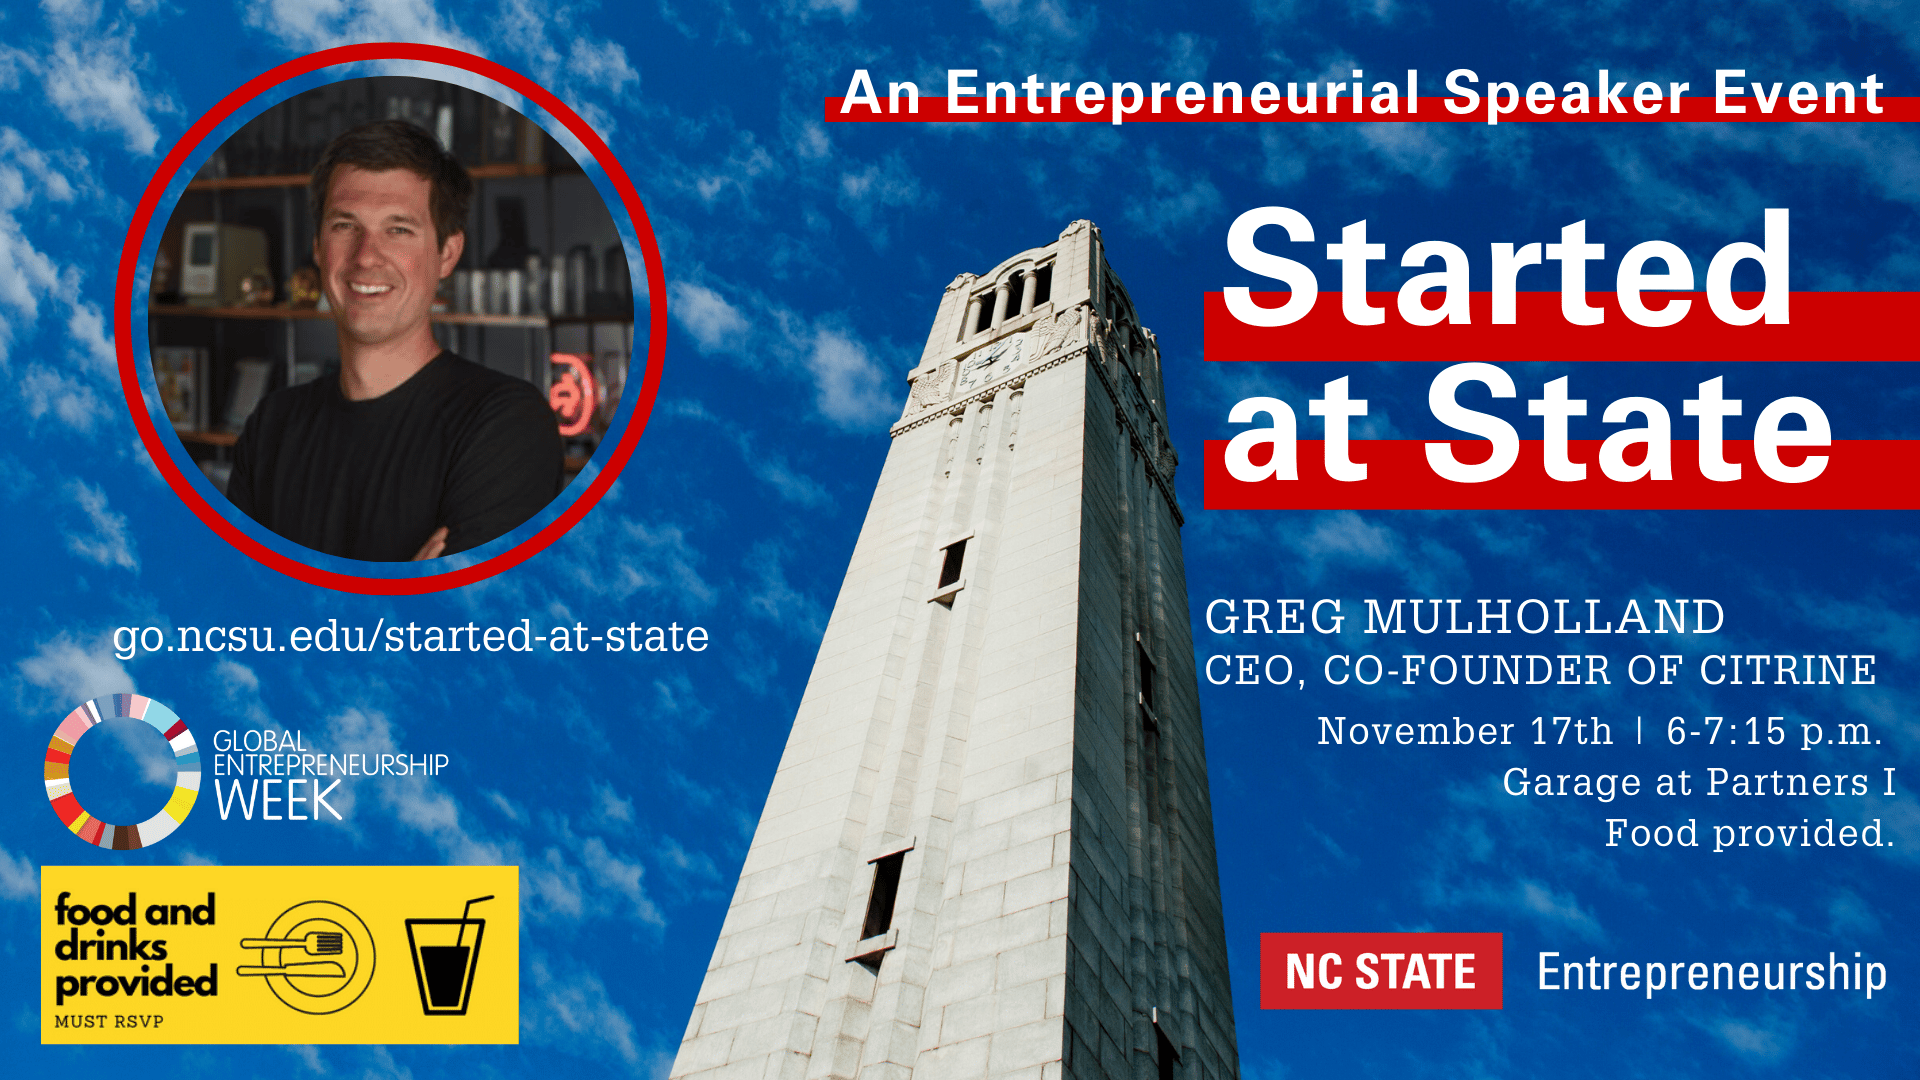 Started at state entrepreneur speaker event with greg mulholland the founder and ceo of citrine